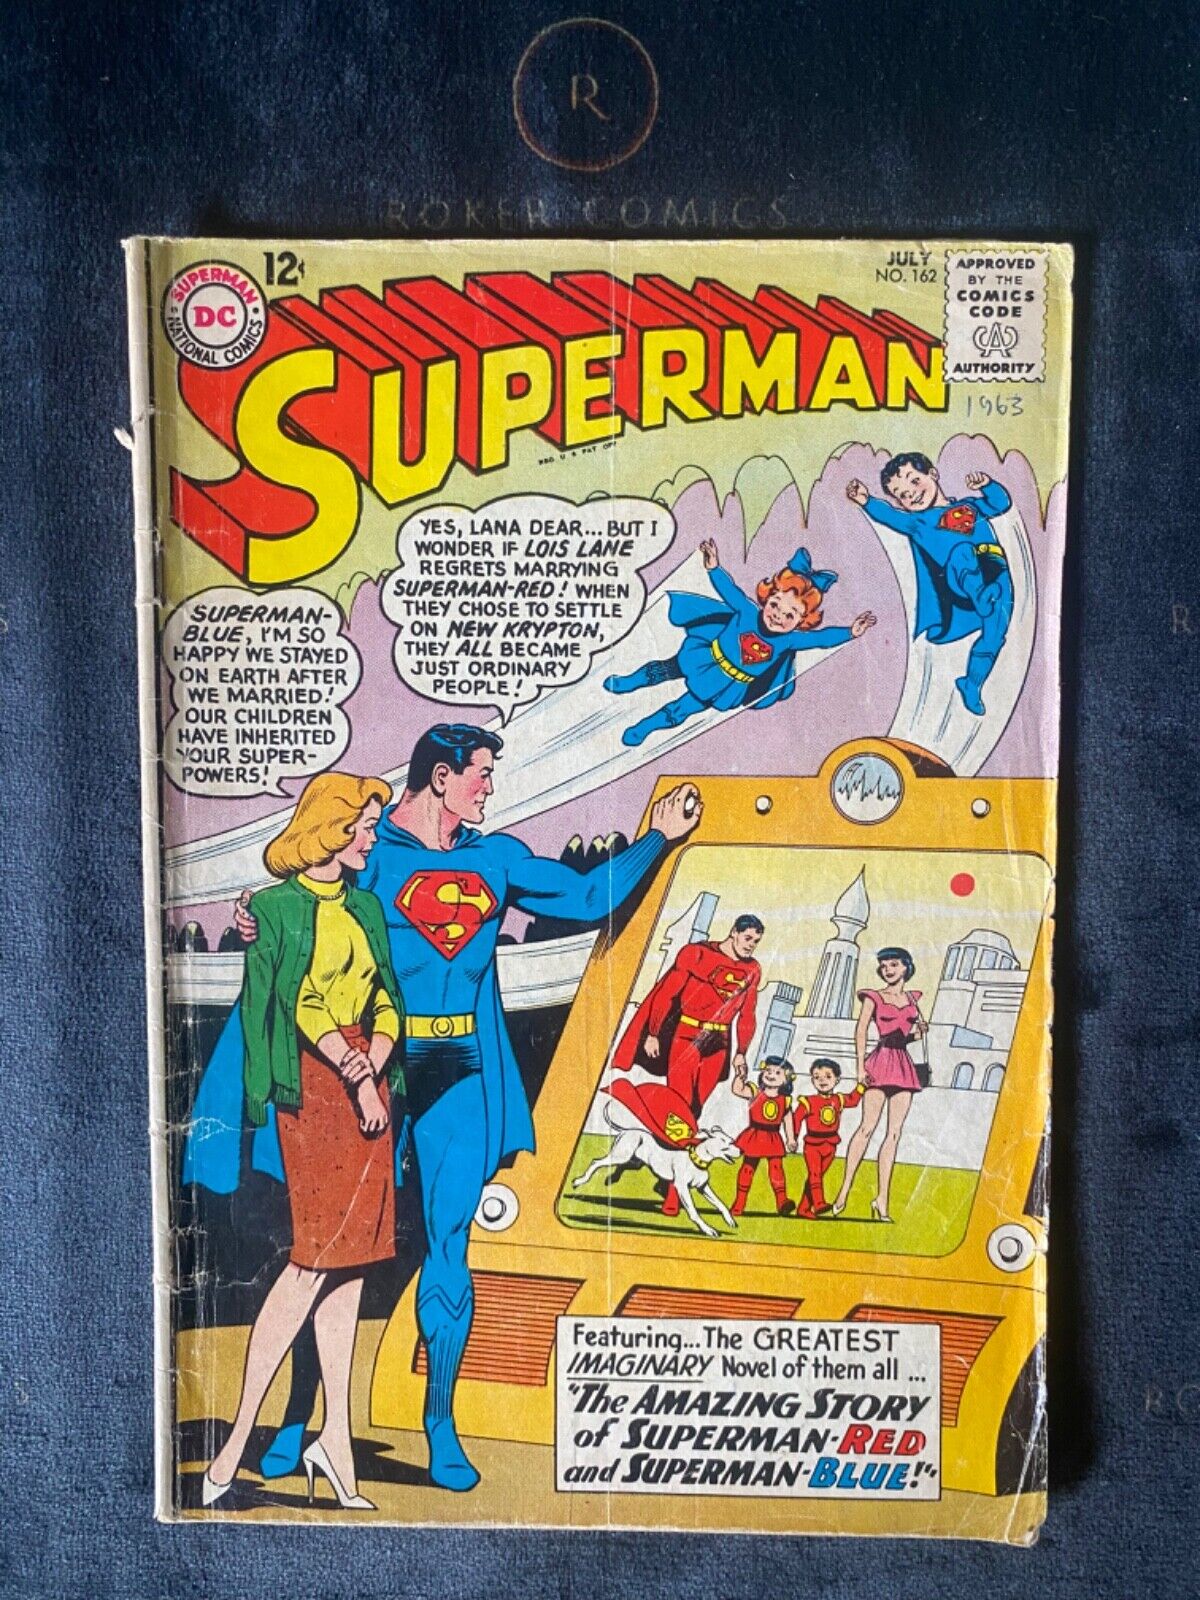 DC COMICS 1963 SUPERMAN #162 SILVER AGE EST FN STORY OF SUPERMAN-RED AND BLUE